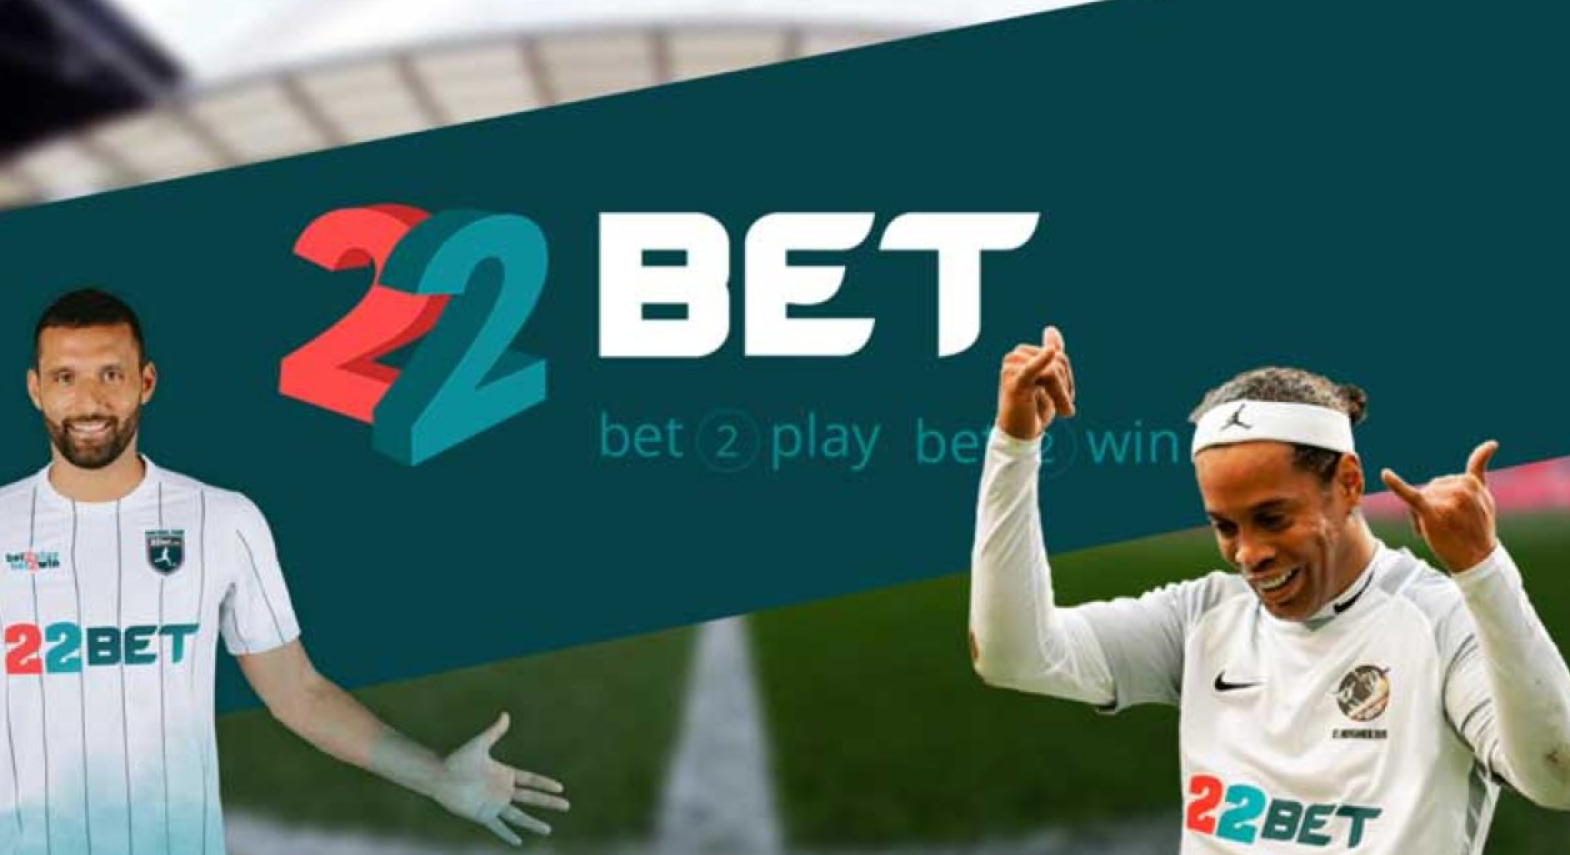 Registration on 22Bet and benefits for NG players